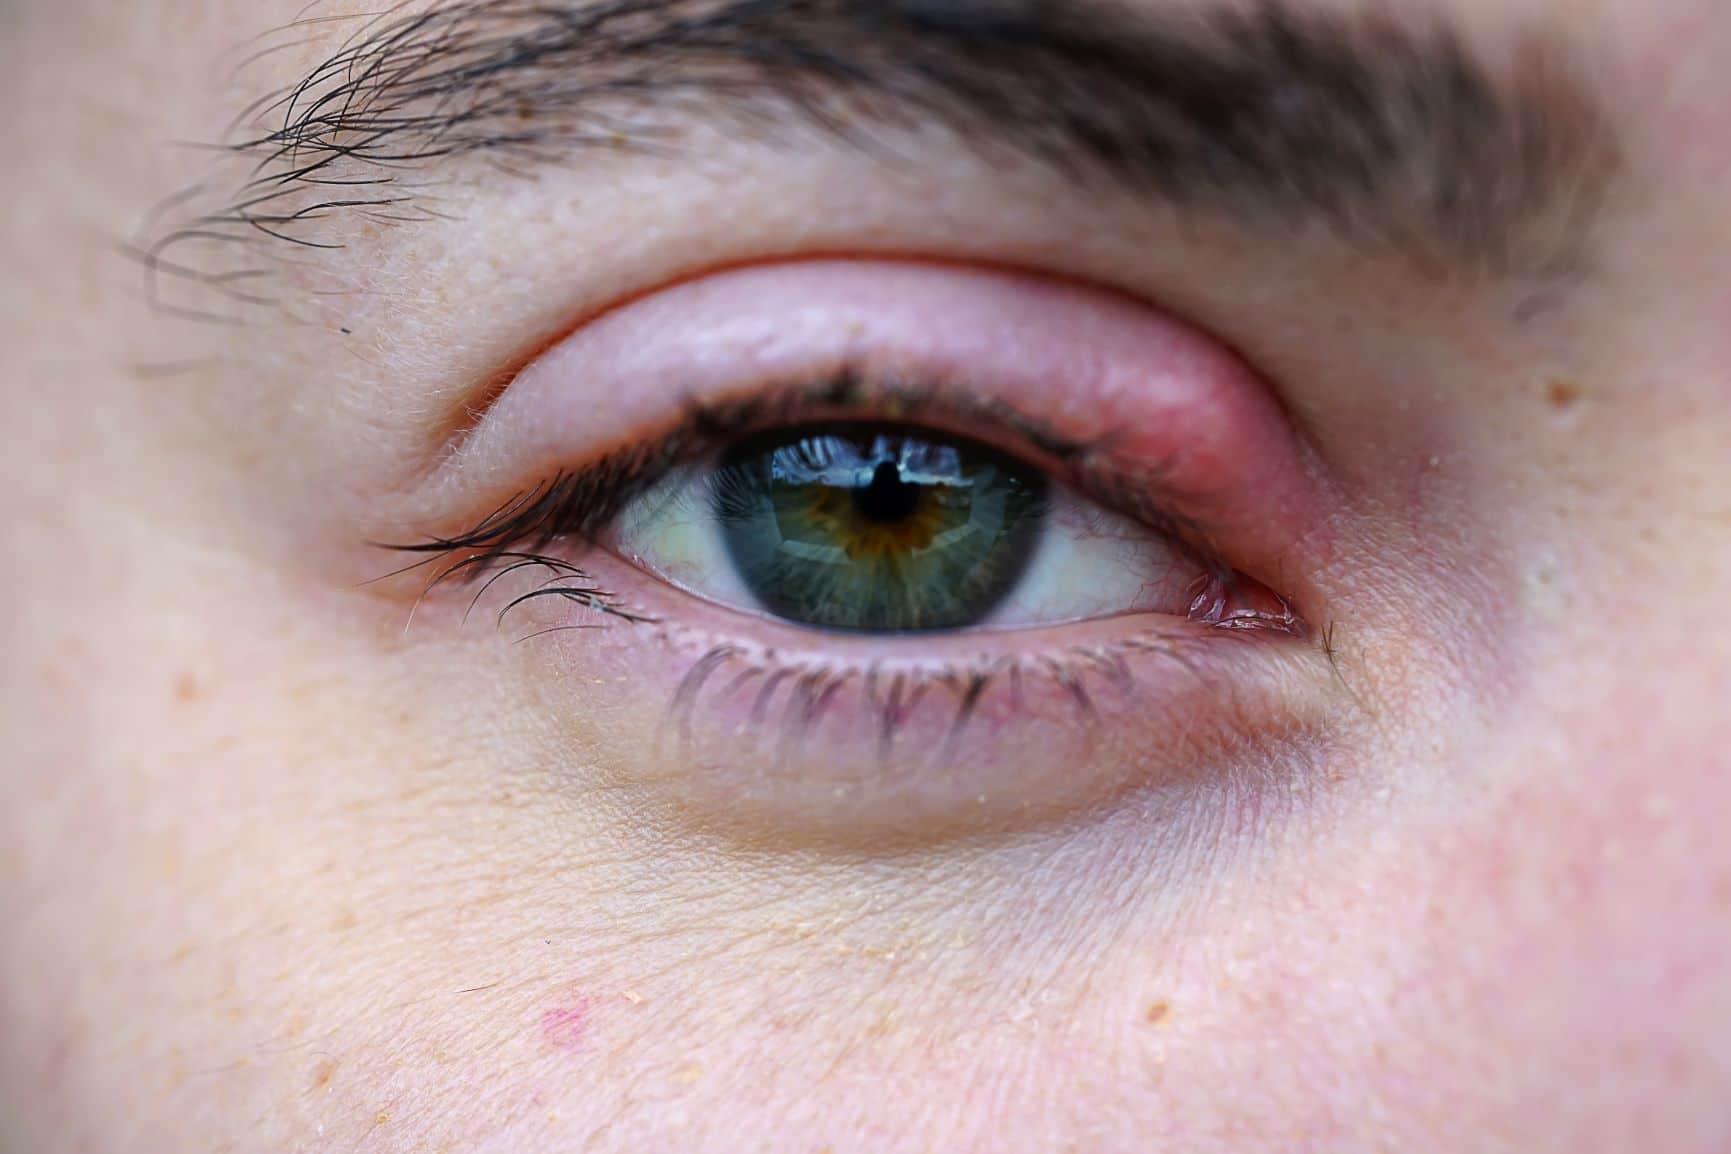 An eye stye, as shown here, usually goes away on its own. If it does not or gets worse, make an appointment to see one of our eye doctors.